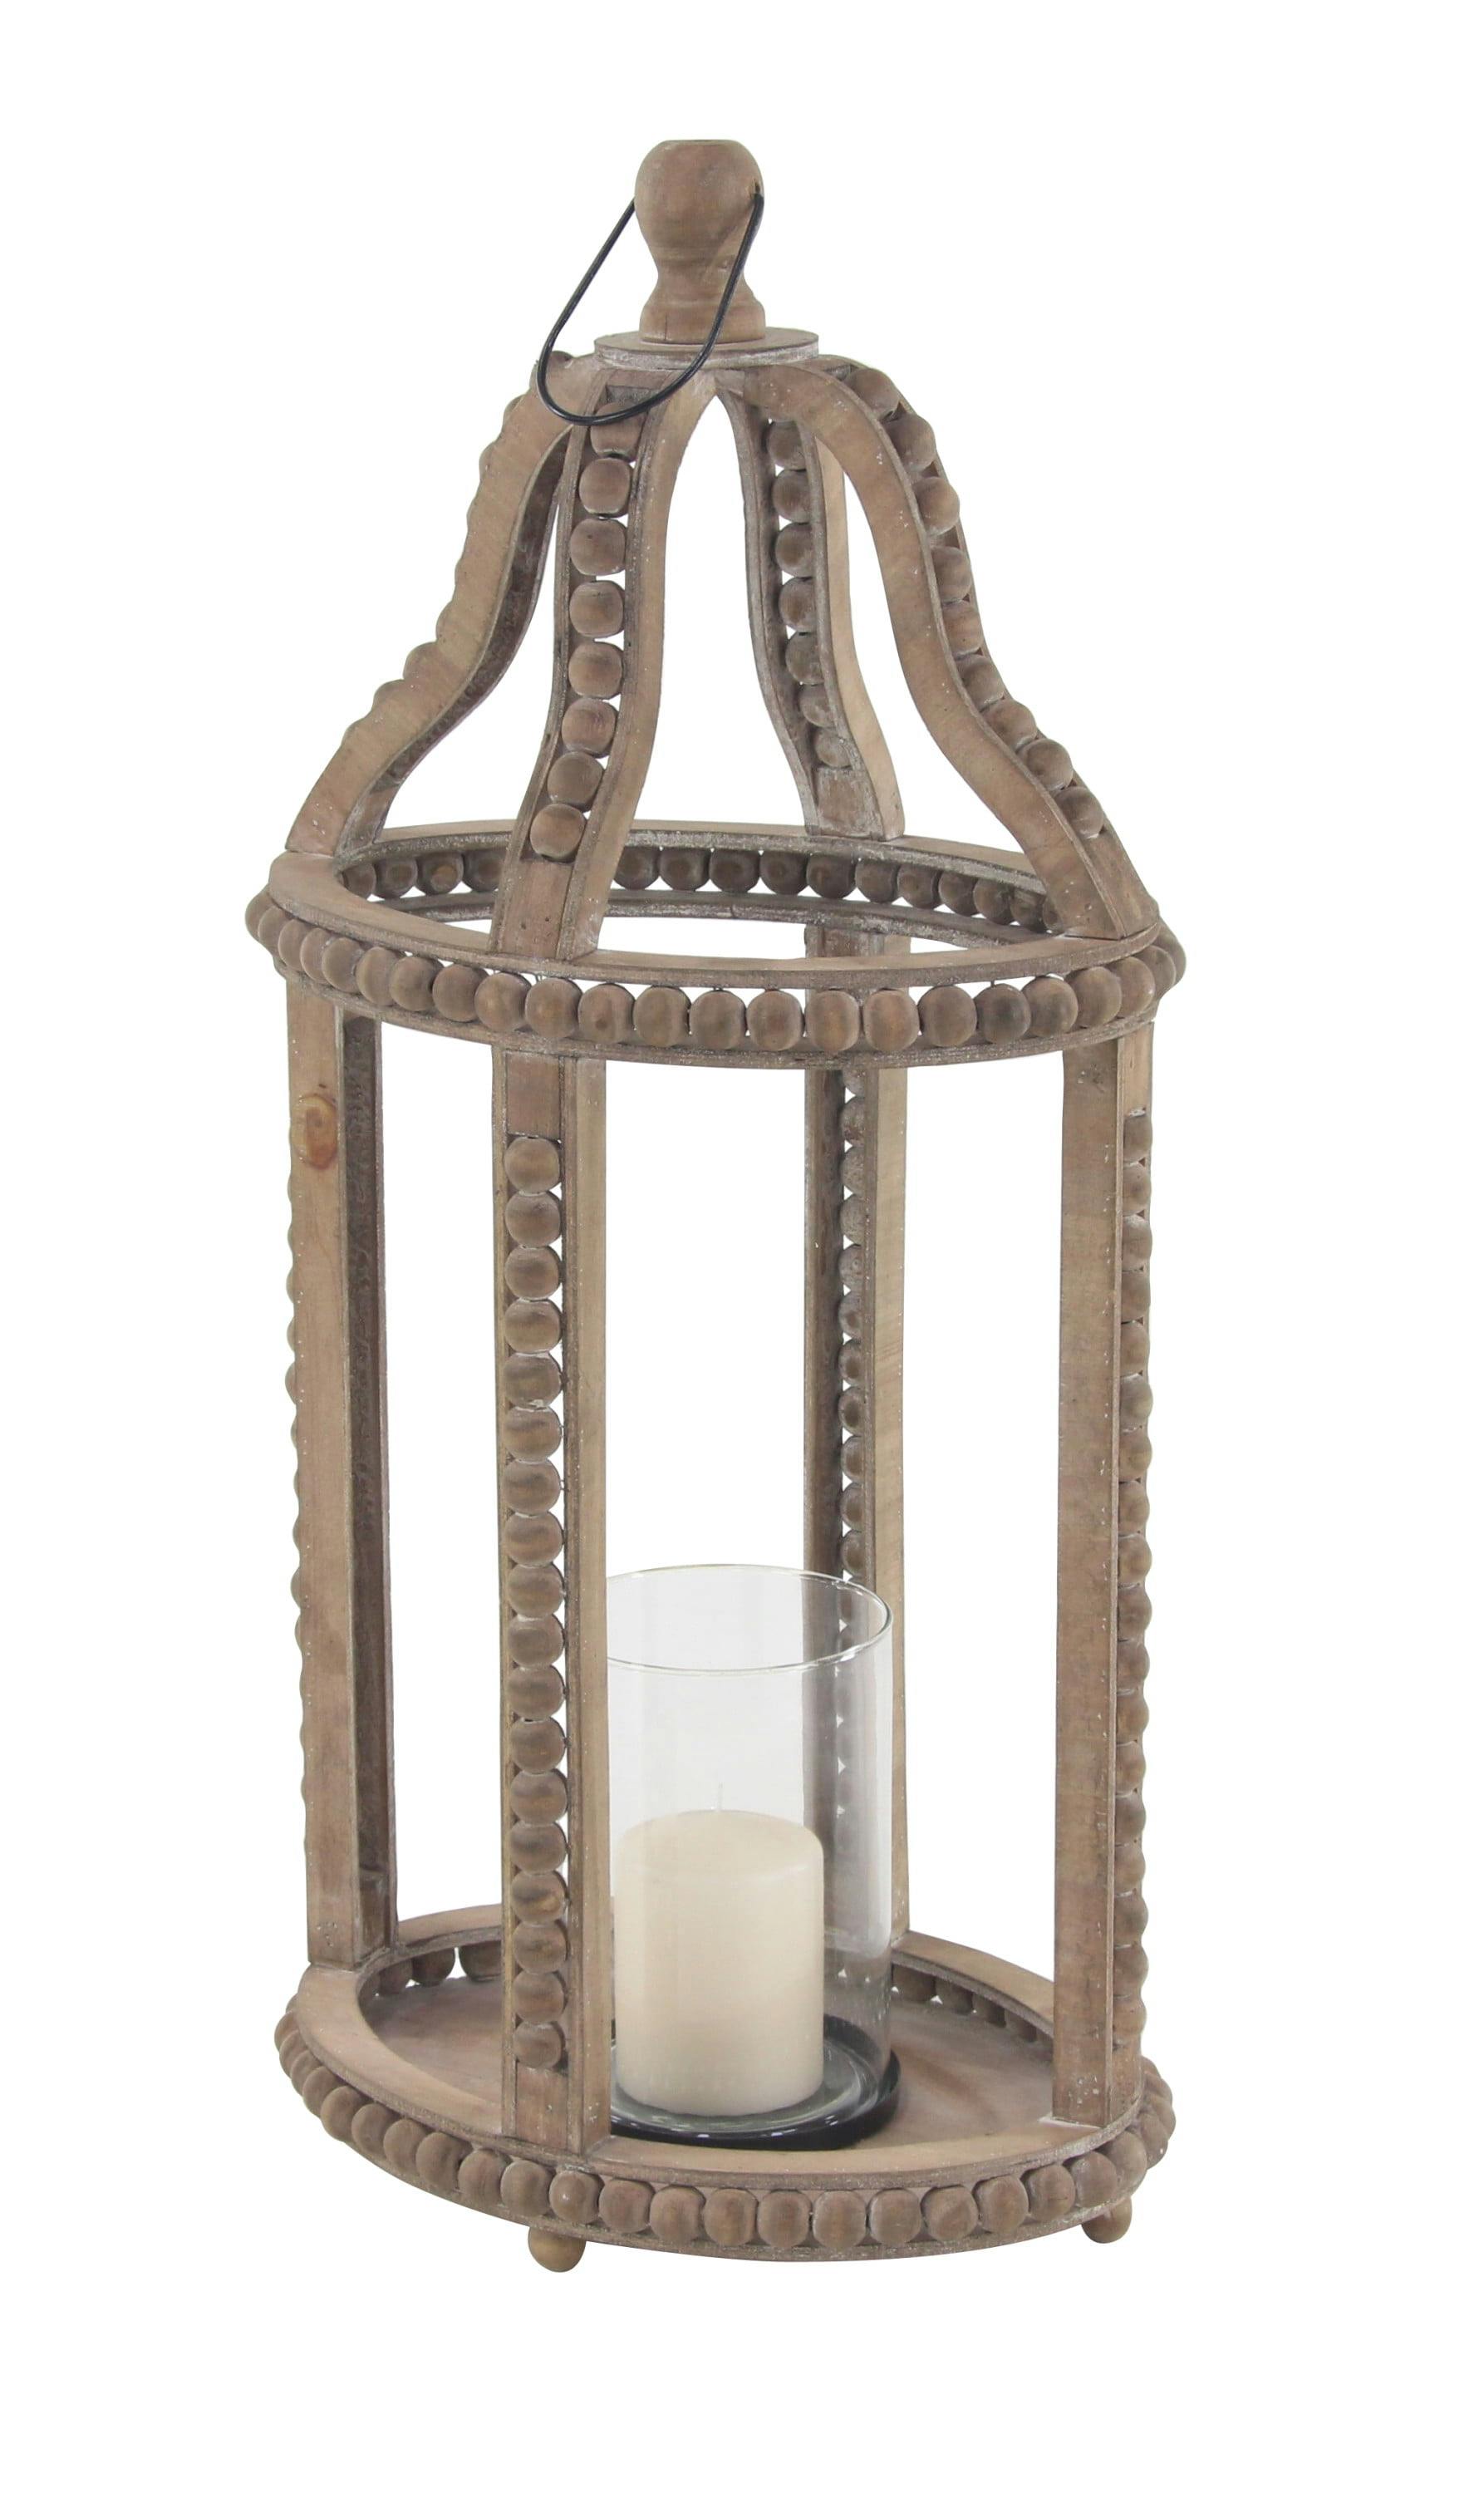 Rustic Farmhouse Reclaimed Wood Beaded Hanging Candle Lantern